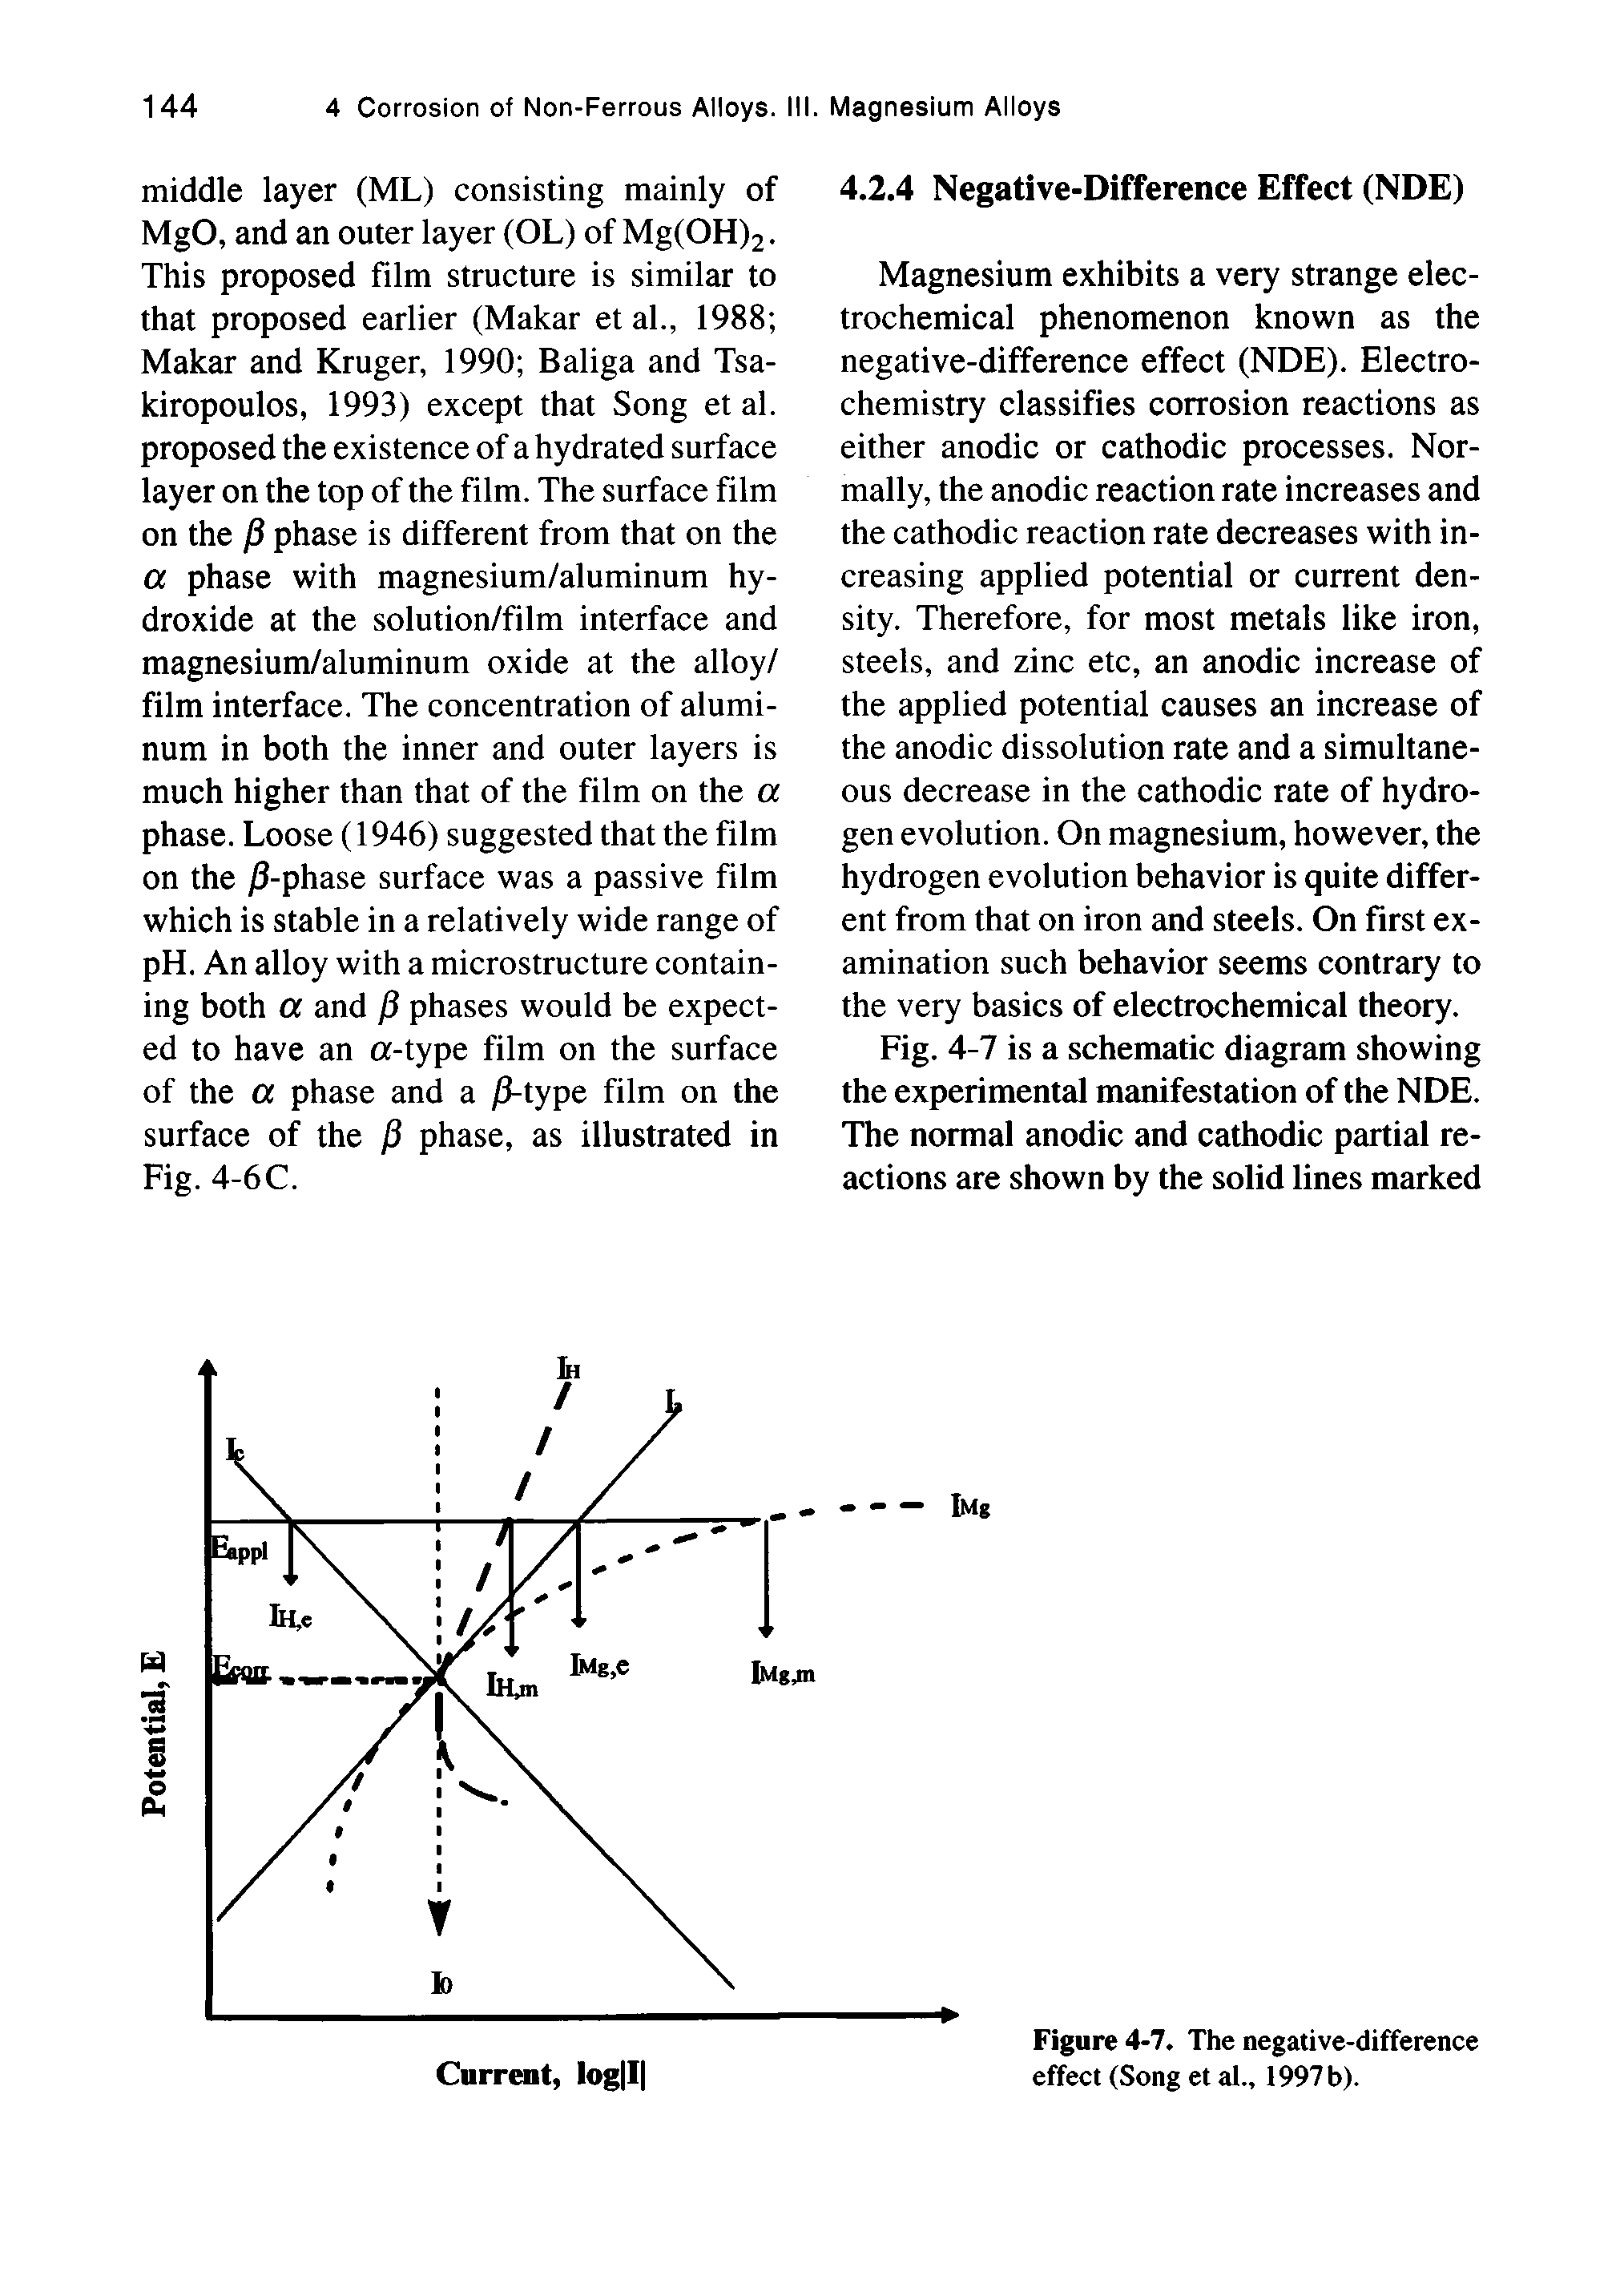 Figure 4-7. The negative-difference effect (Song et al., 1997b).